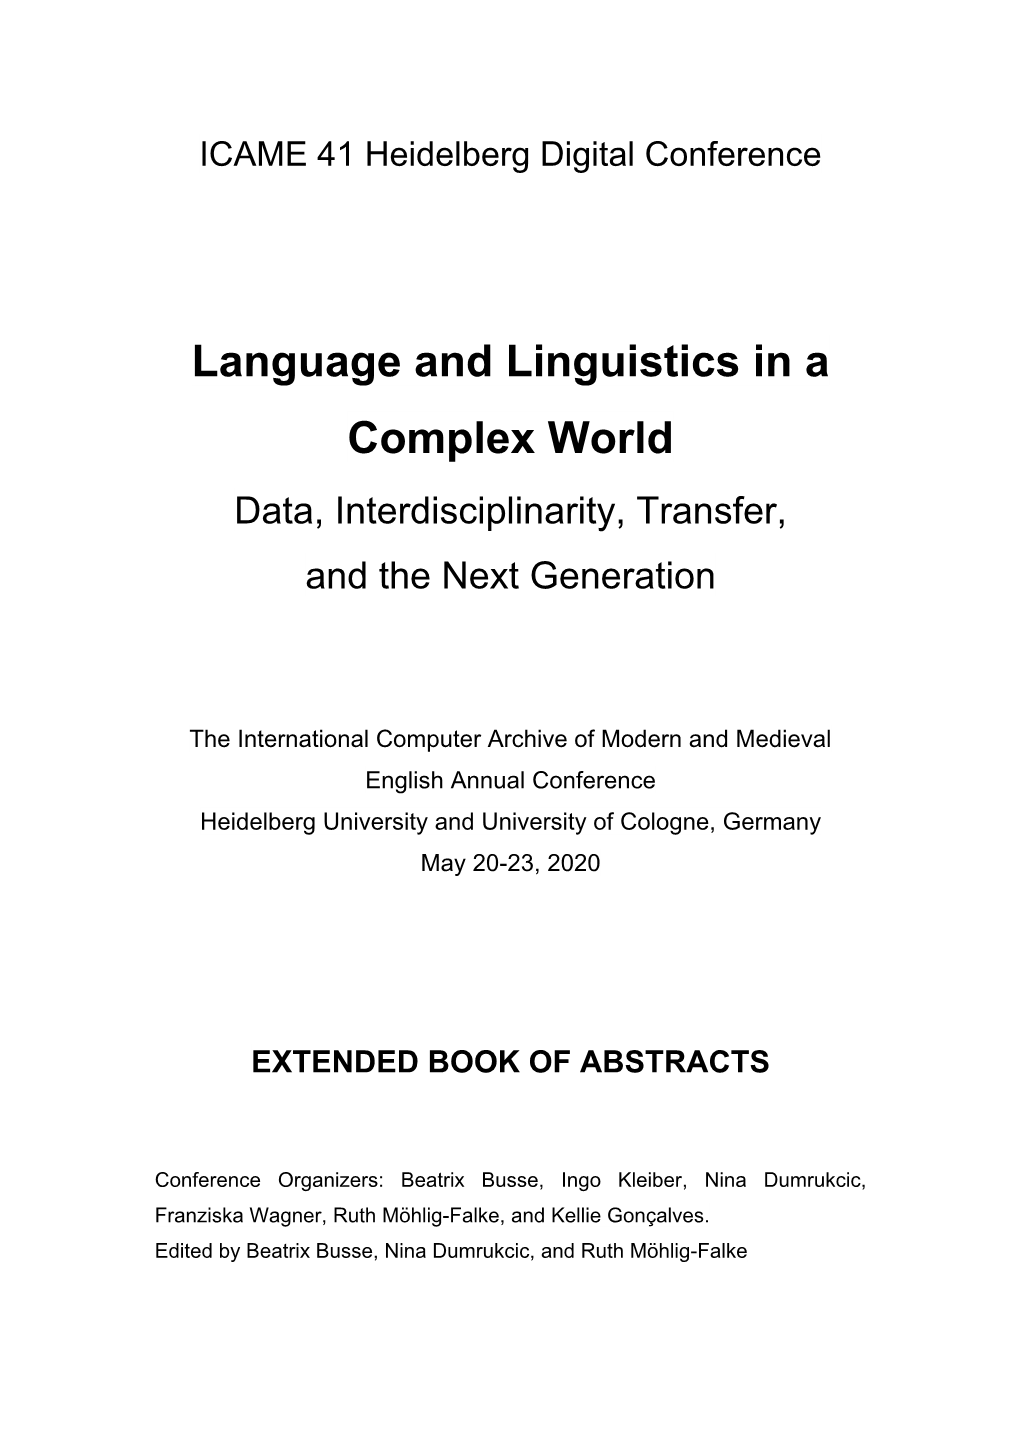 Language and Linguistics in a Complex World Data, Interdisciplinarity, Transfer, and the Next Generation